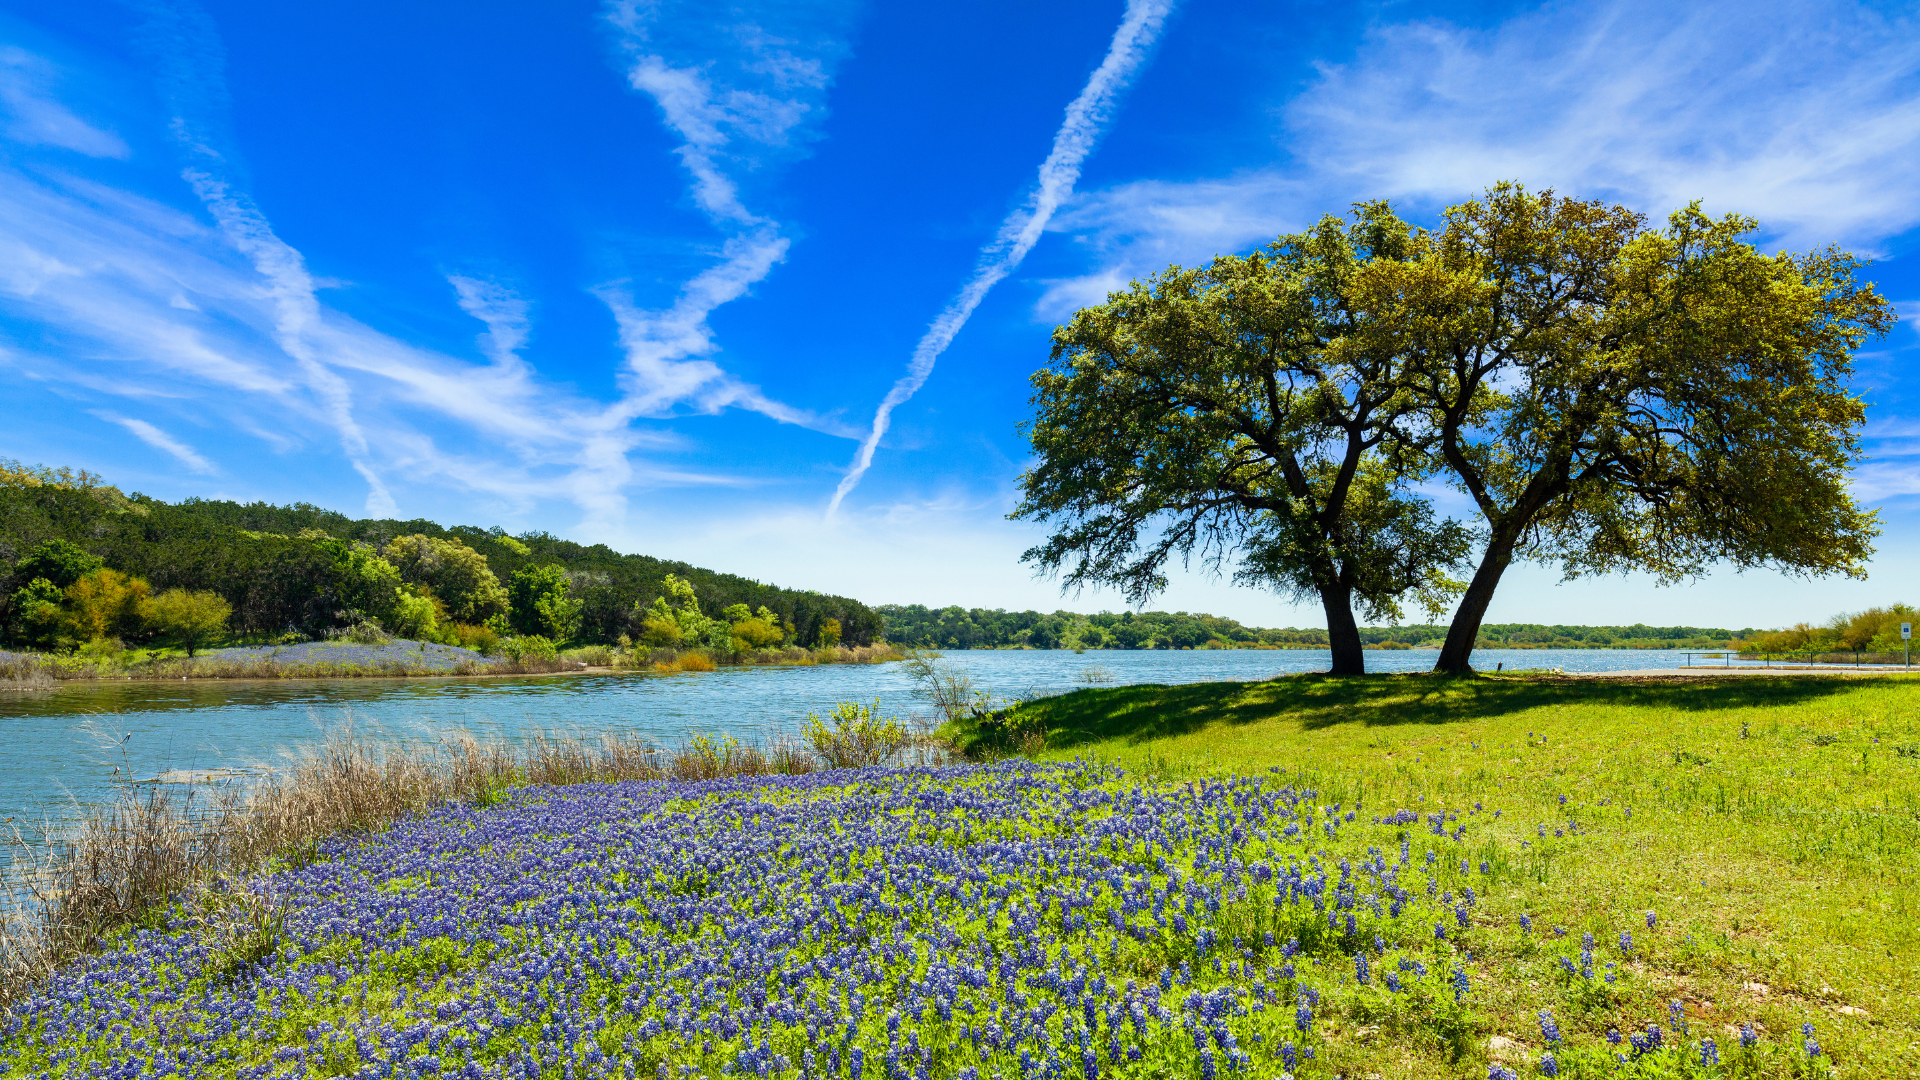 Bluebonnet field in the Texas Hill Country with river in background and large oak tree